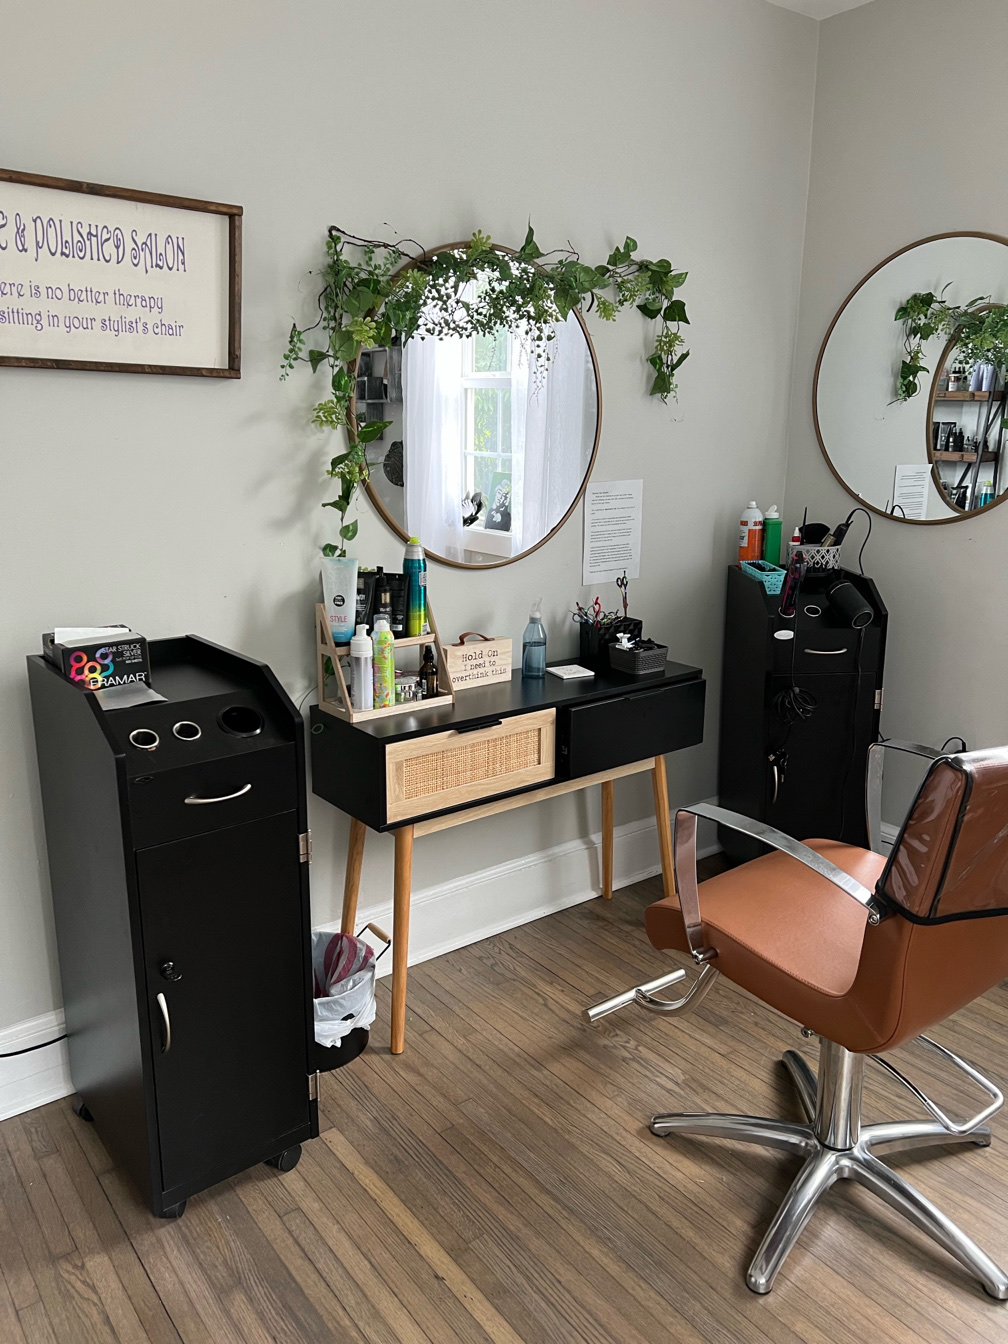 Varnish Lane, D.C.'s waterless nail salon, expanding to West End, Mount  Vernon Triangle and beyond - Washington Business Journal